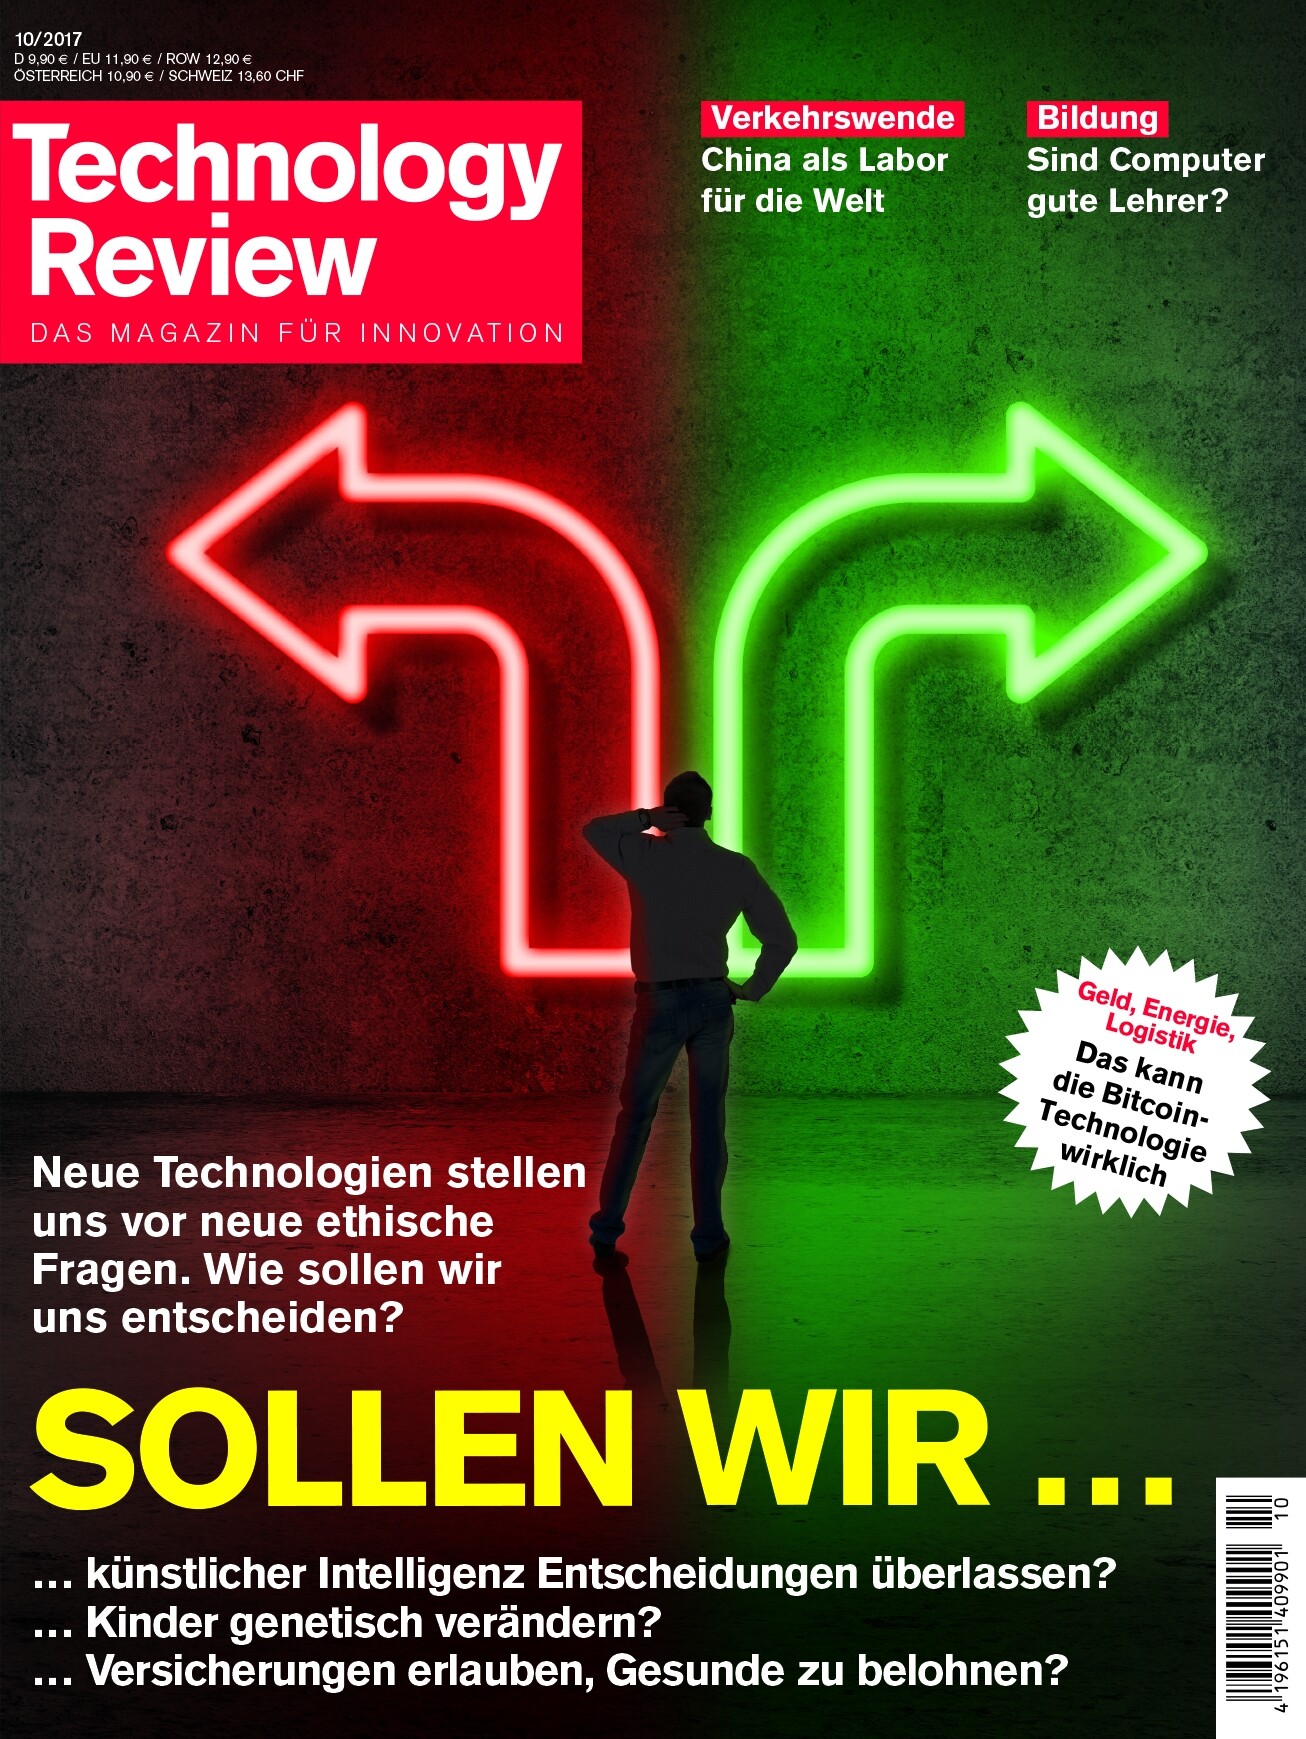 Technology Review 10/2017